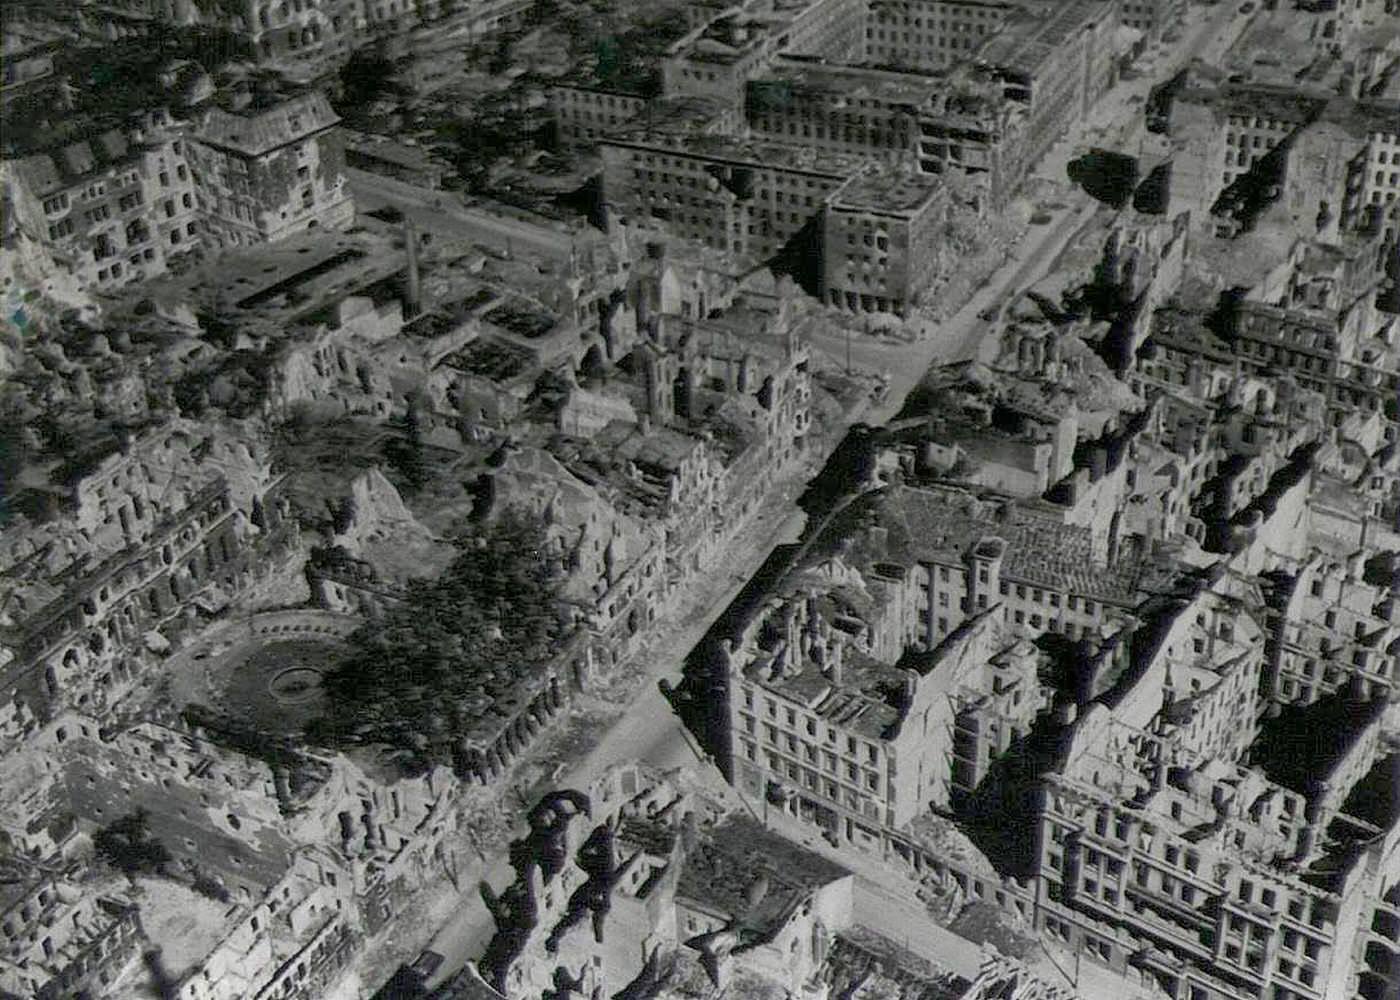 Berlin bomb damage at the concluding weeks of World War II.